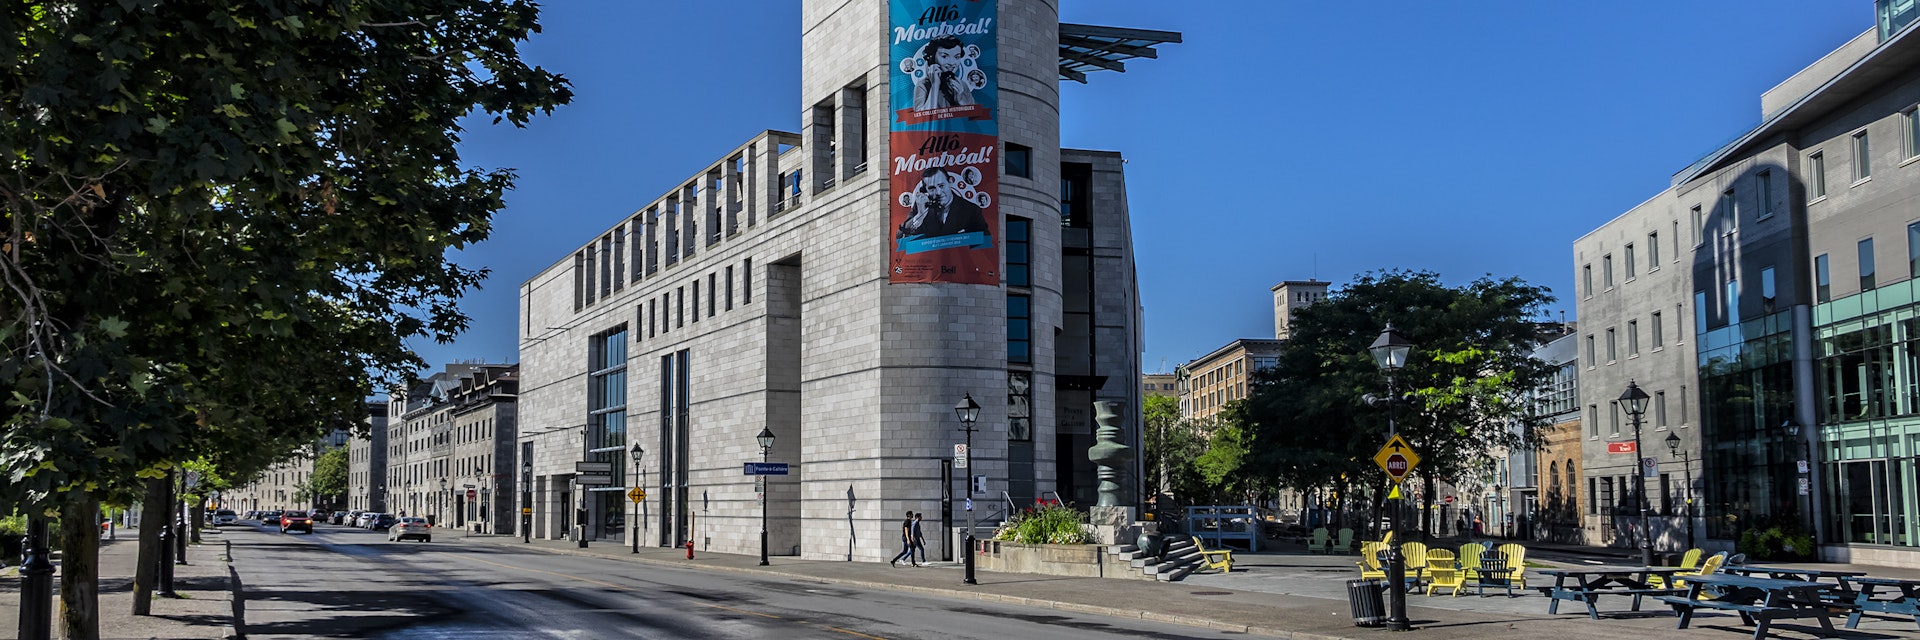 AUGUST 13, 2017: Exterior of Pointe a Calliere, a museum of archaeology and history in Old Montreal.
1160495017
america, archaeology, architecture, art, attraction, beautiful, blue, building, calliere, canada, city, culture, downtown, harbor, historic, historical, history, holiday, landmark, modern, montreal, monument, museum, old, outdoor, outdoors, peer, place, pointe, pointe a calliere, port, quebec, sky, street, tall, tour, tourism, travel, view